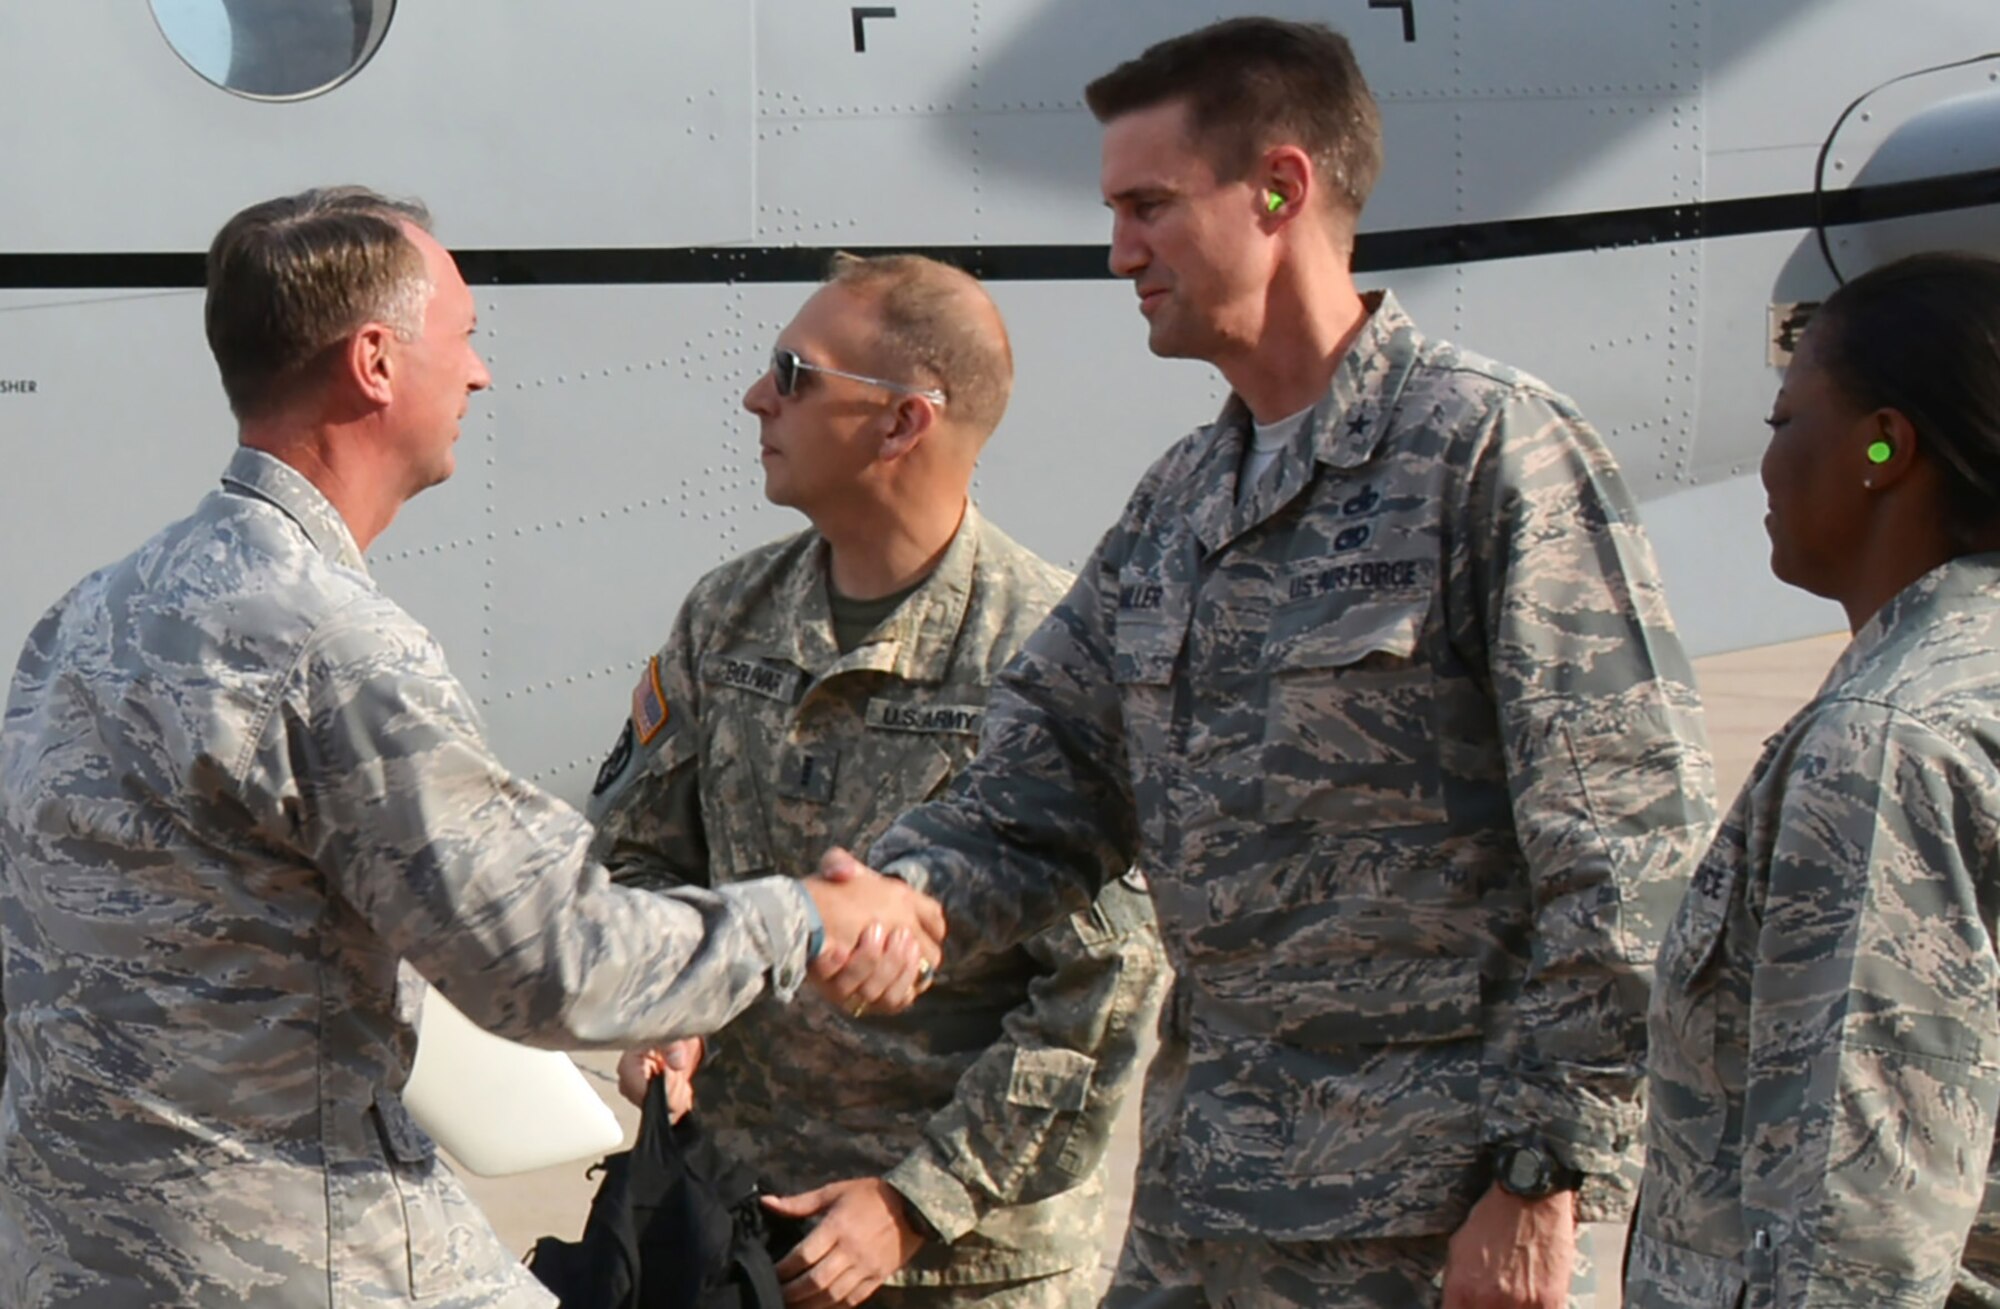 Maj. Gen. Warren D. Berry, Air Force Materiel Command vice commander, is welcomed by Tinker Air Force Base senior leaders upon his arrival to Tinker Air Force Base Sept. 12. General Berry was making his first full immersion visit to Tinker. During his two-day trip, General Berry received a holistic immersion of the Air Force Sustainment Center, to include the 72nd Air Base Wing, the Oklahoma City Air Logistics Complex and Life Cycle Management Center offices currently housed in Bldg. 3001, headquarters to the AFSC and OC-ALC. Greeting General Berry are Brig. Gen. Tom Miller, AFSC vice commander, and Col. Stephanie Wilson, 72nd ABW commander. As vice commander of AFMC, which employs some 80,000 people and carries $60 billion of budget authority annually, General Berry oversees activities in six different centers responsible for installation and mission support, discovery and development, test and evaluation, life cycle management services and sustainment. (Air Force photo by Darren D. Heusel)